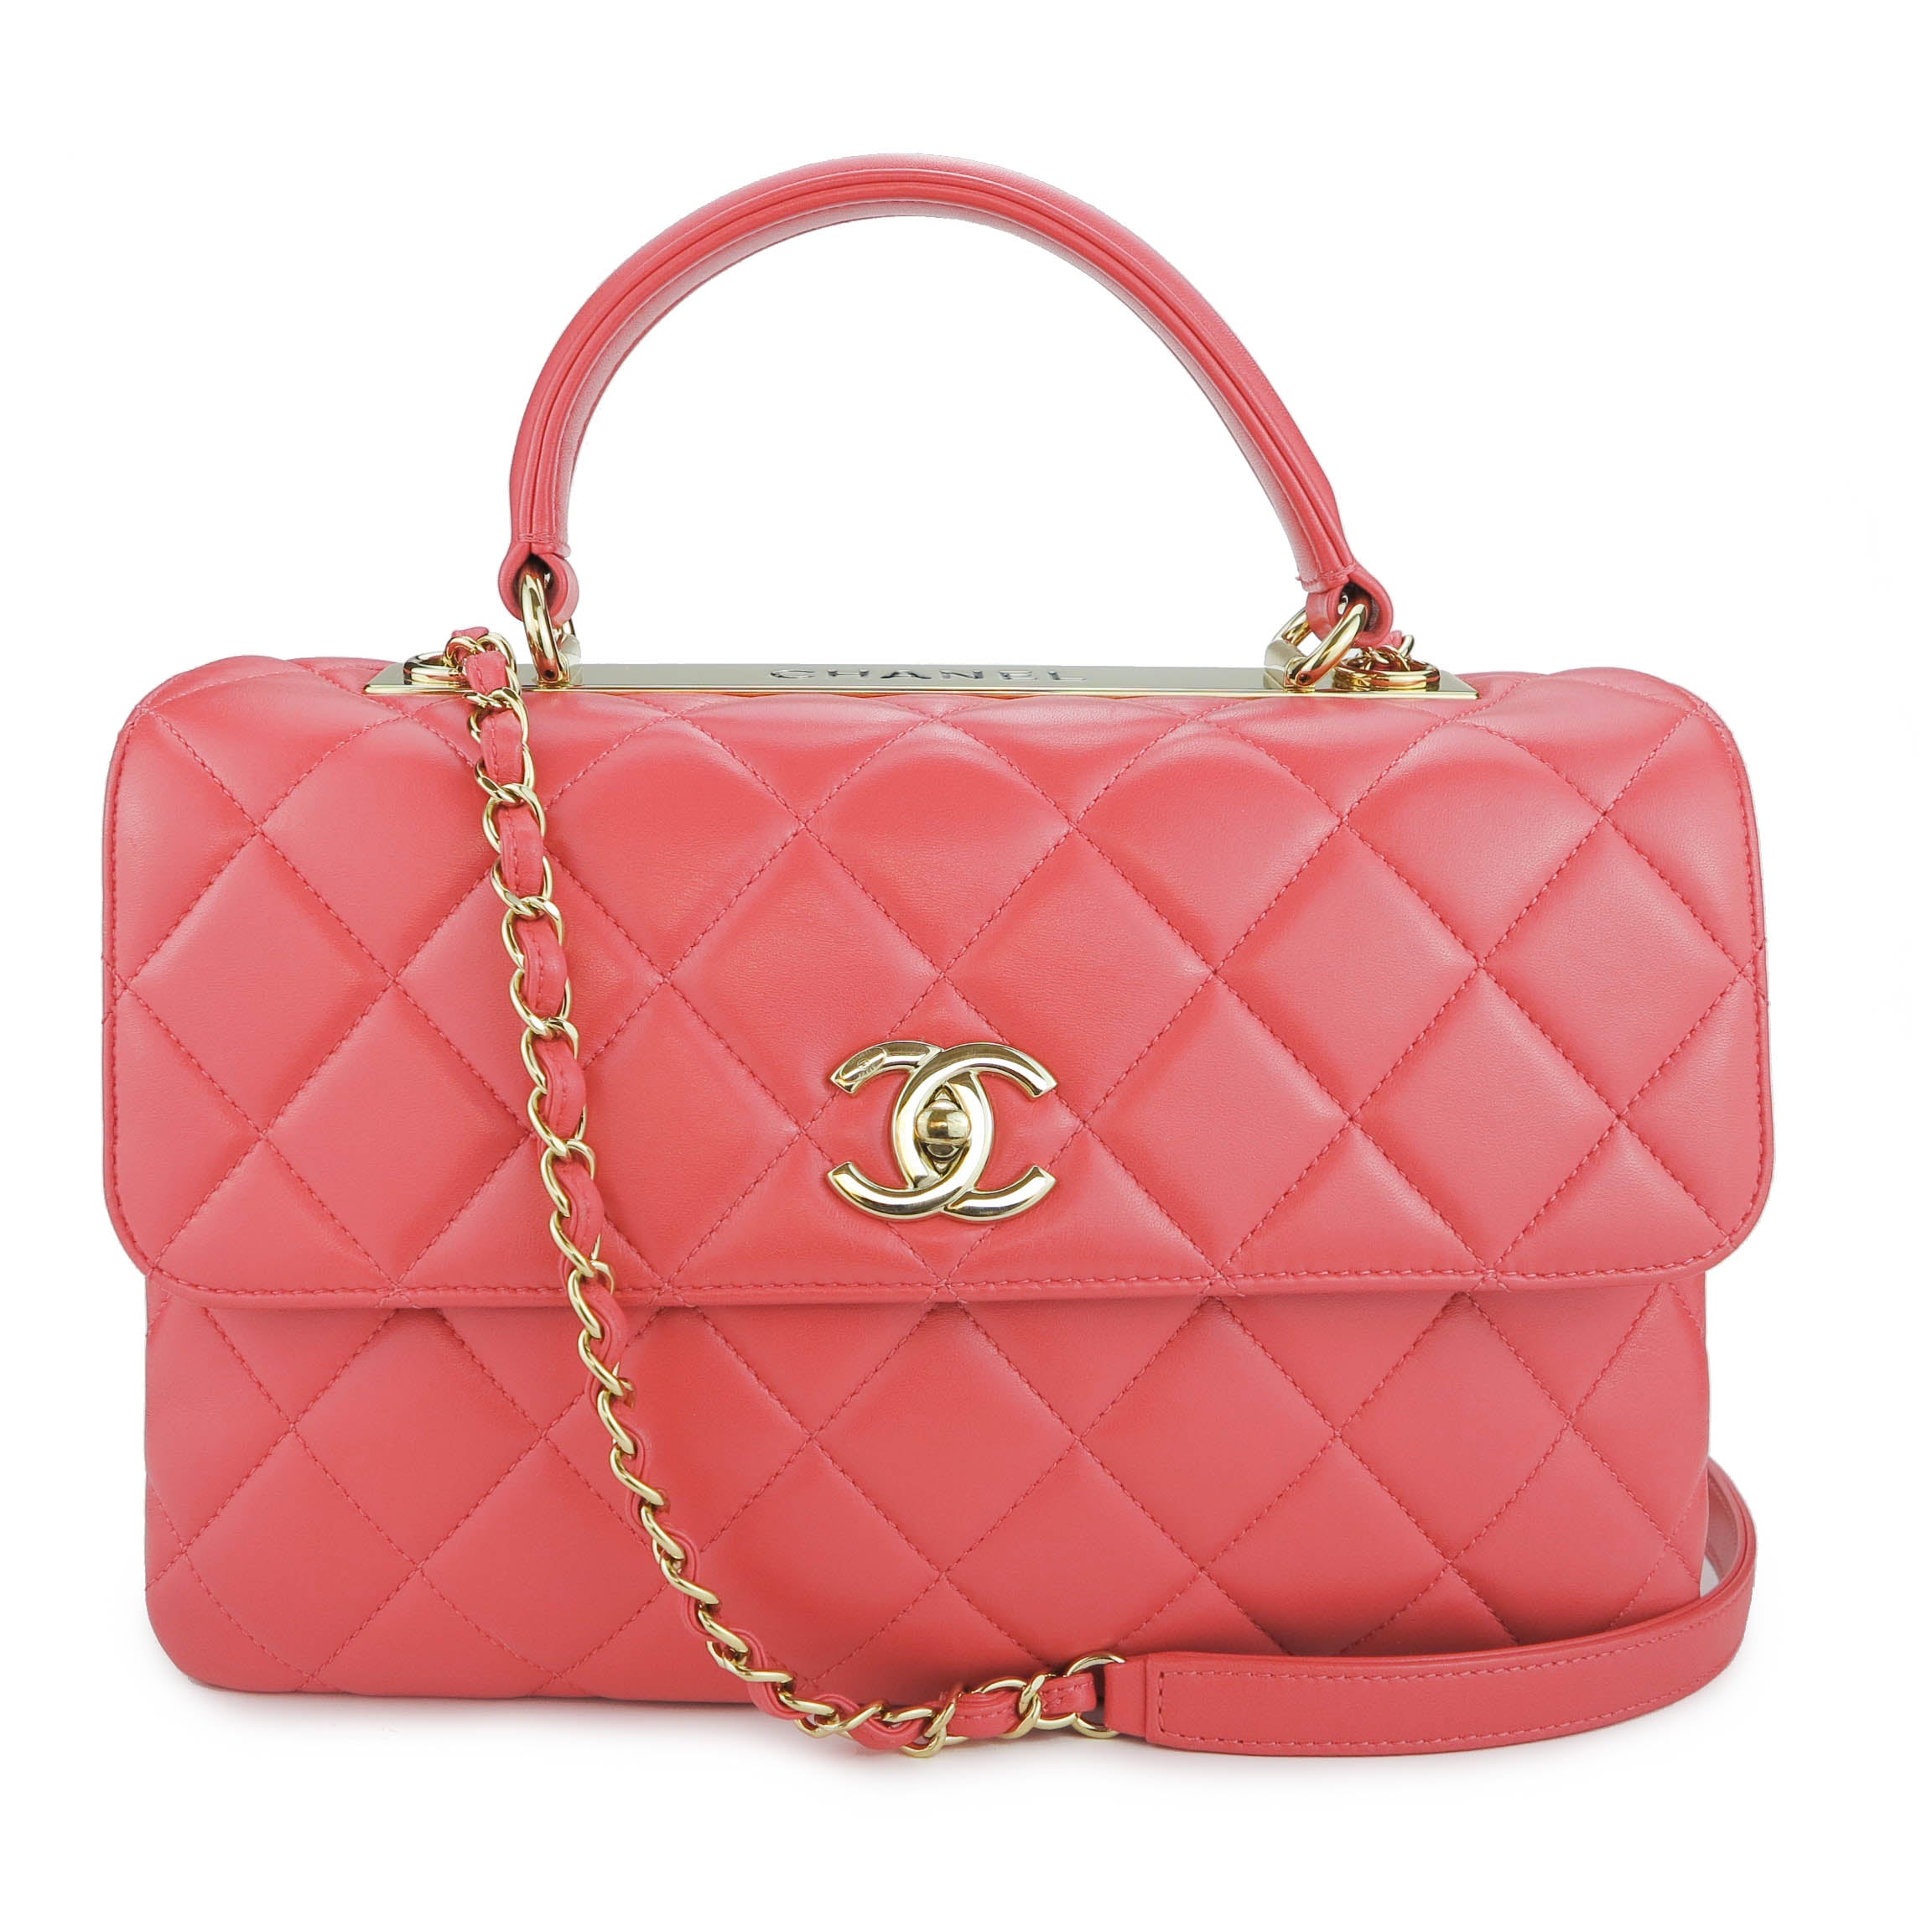 CHANEL Medium Trendy CC Flap Bag with Top Handle in Coral Pink